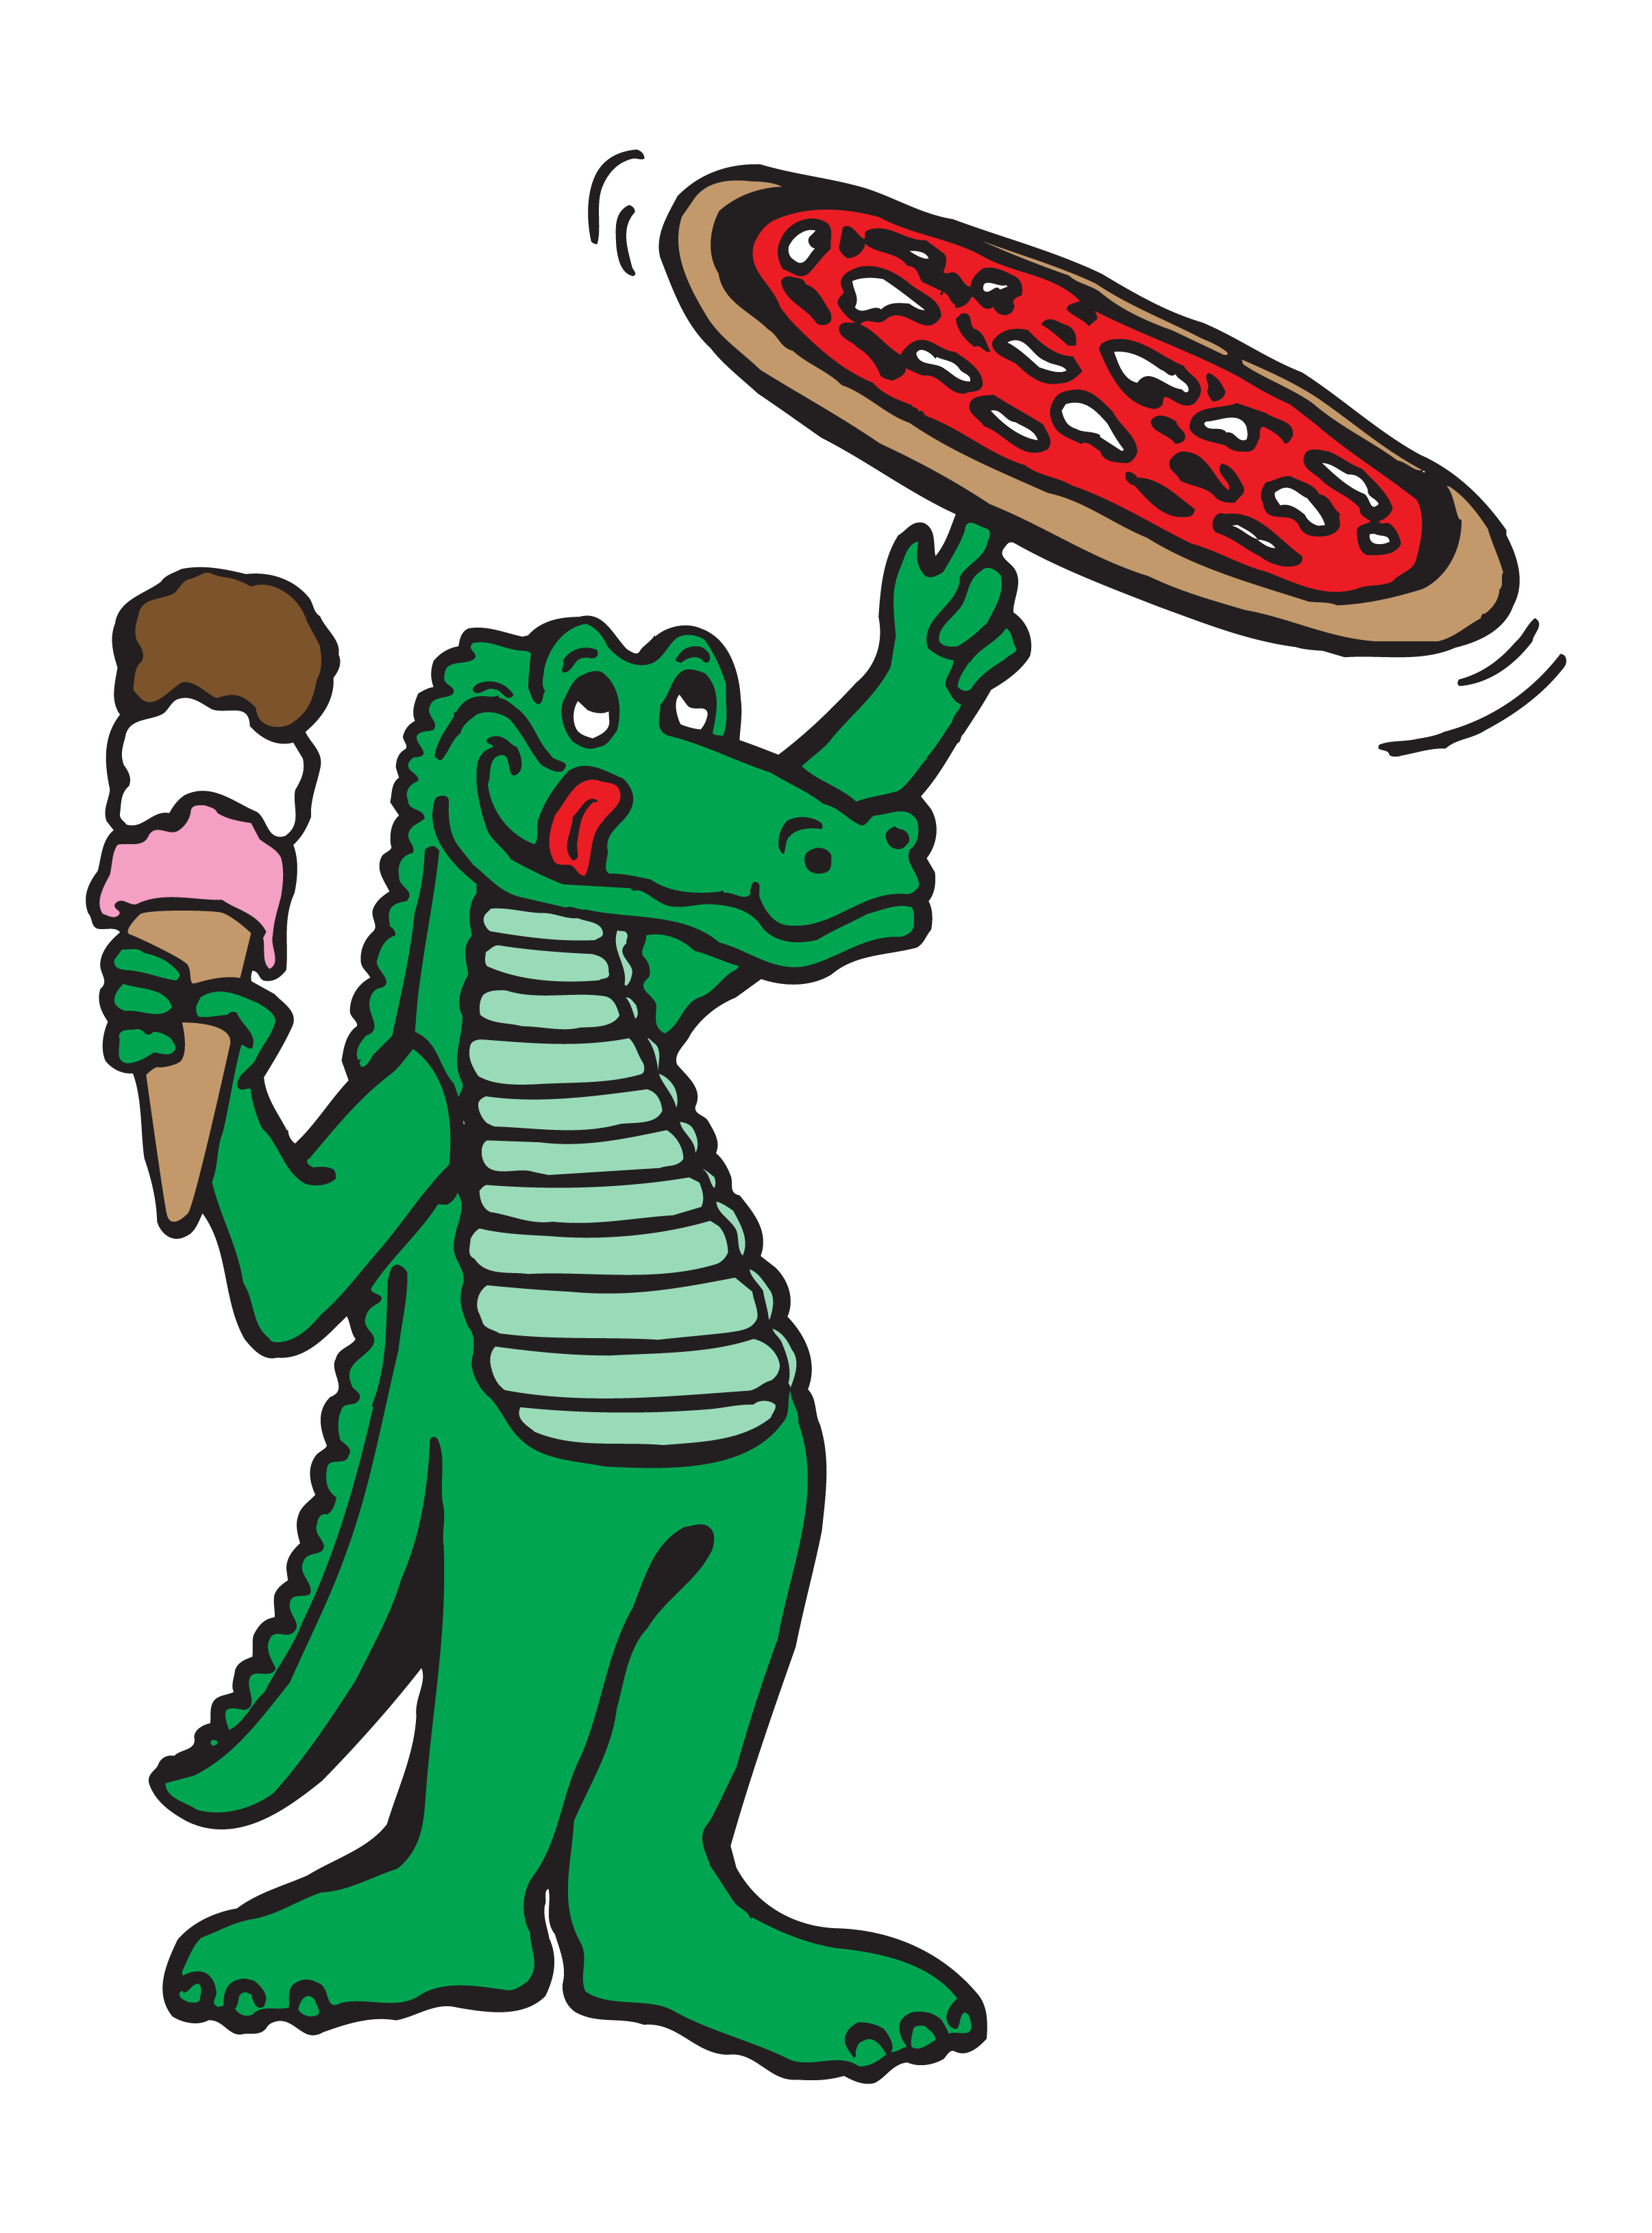 Prep's Pizza Gator with pizza and ice cream